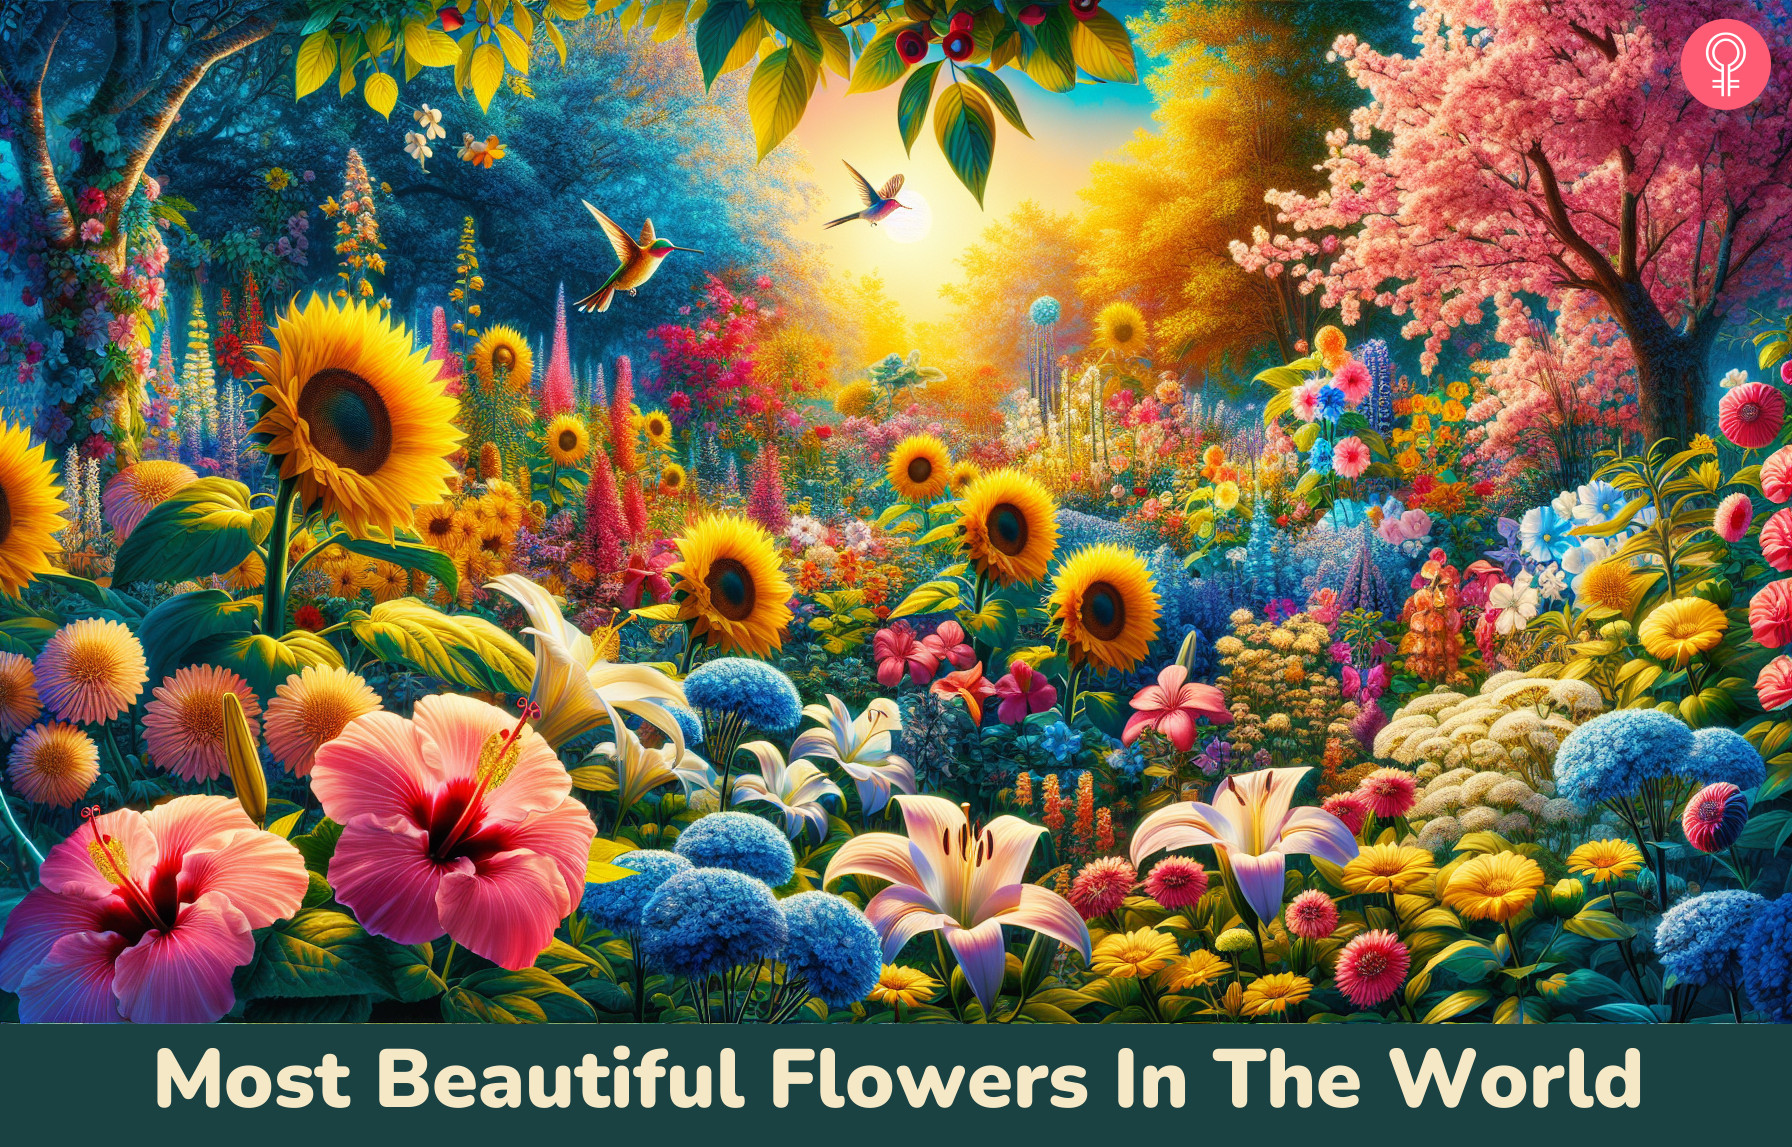 50 of the most beautiful flowers to lift your spirit